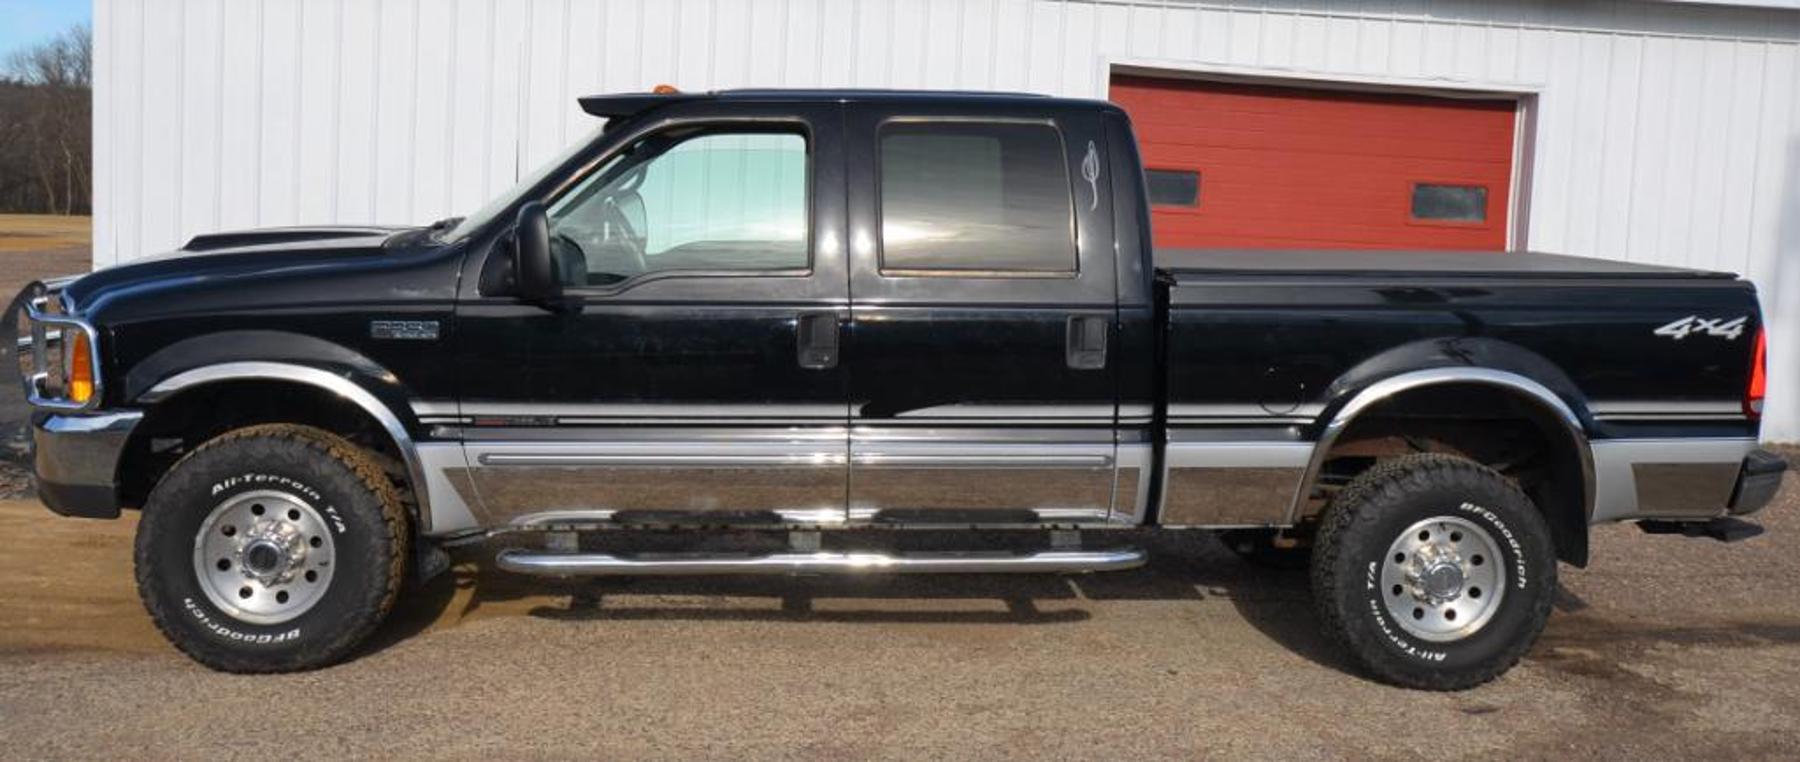 2000 Ford F350, Enclosed Trailer, 100+ Morgan Silver Dollars, 18 Steamer Trunks, Tools & More!